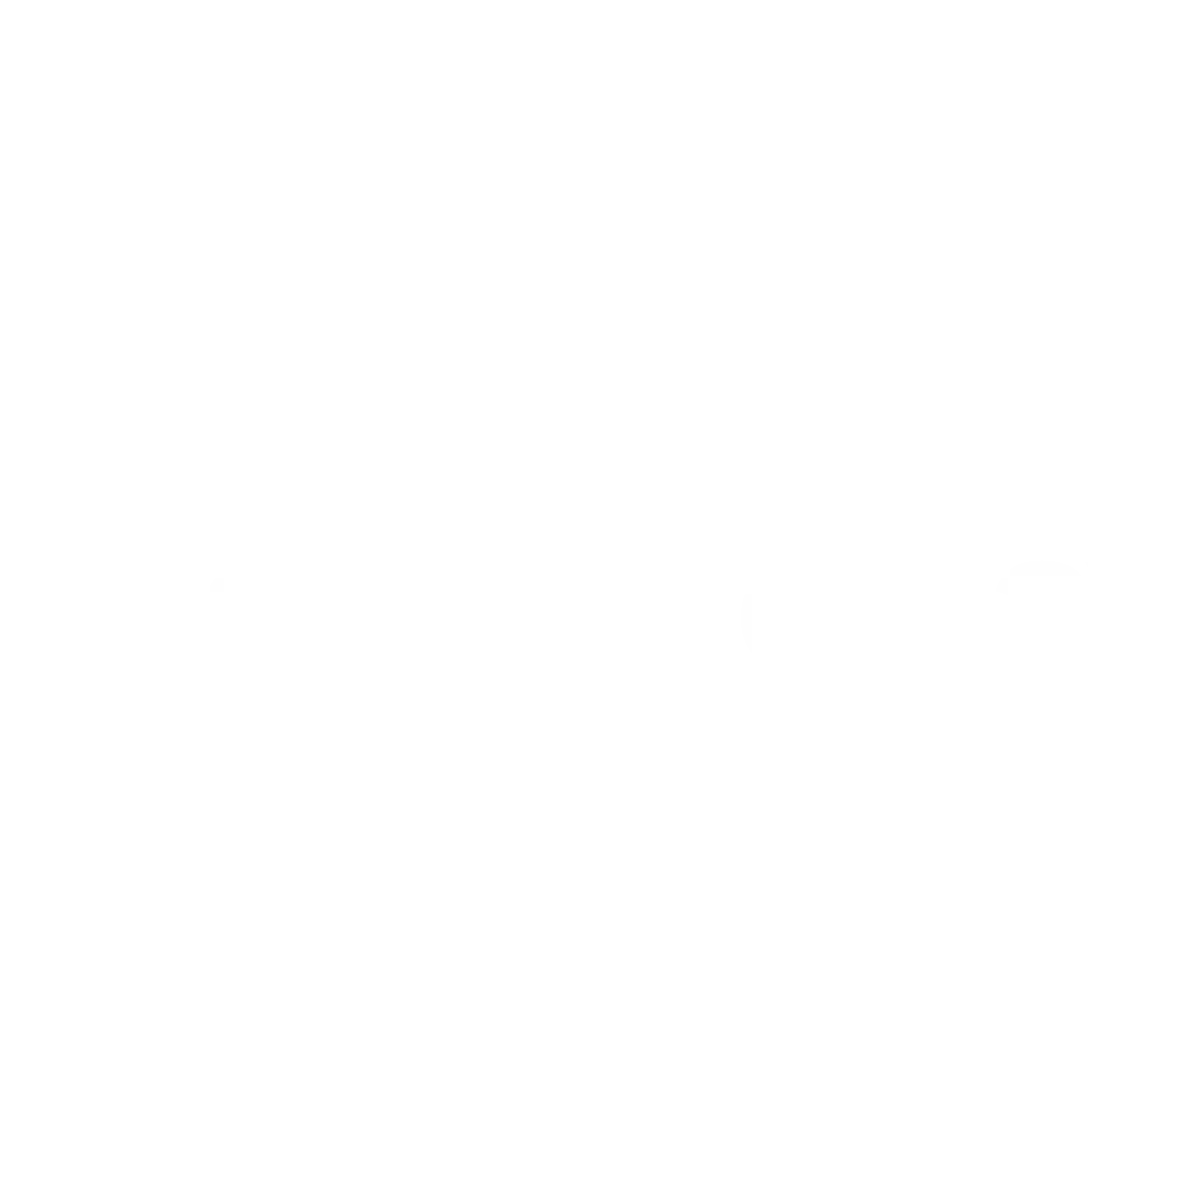 Servalesa's philosophy is based on understanding and studying nature, its balance and the needs of the farmers. Knowledge that we put at the service of agronomic research, thus achieving the most advanced technology for each crop management strategy